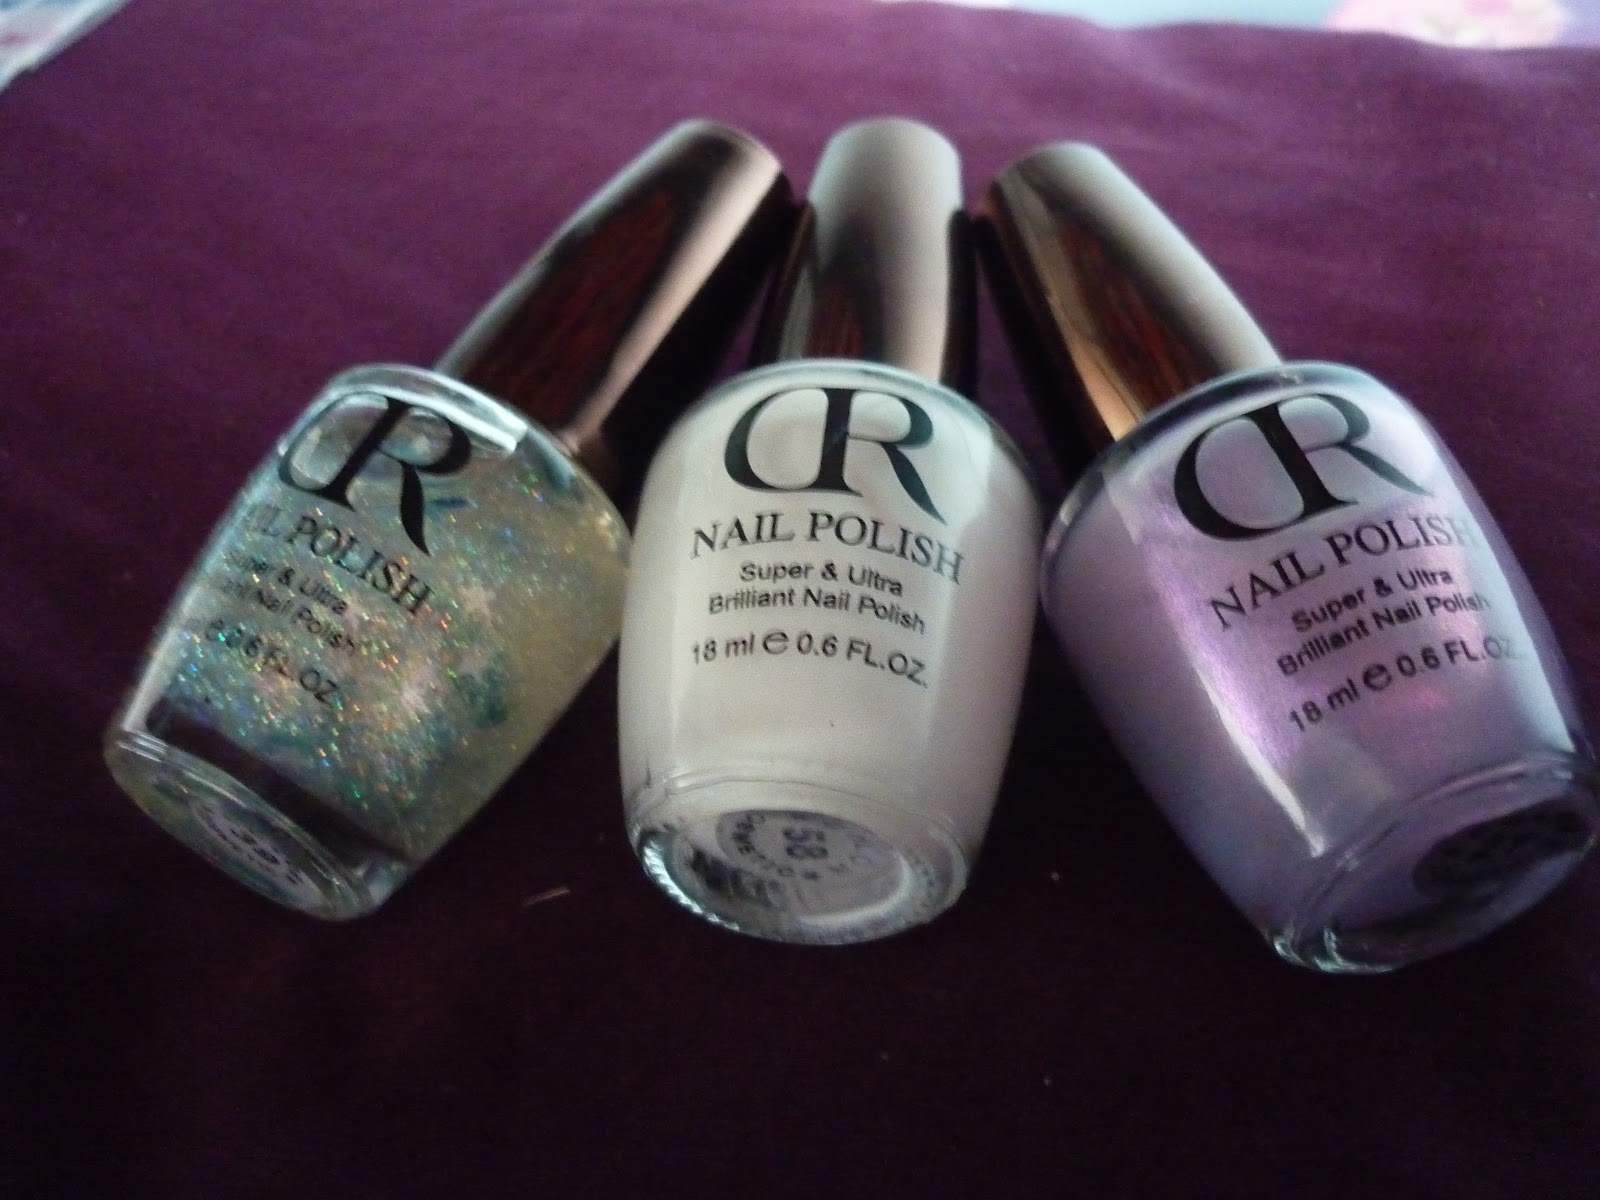 1. CR Nail Polish Color Collection - wide 10